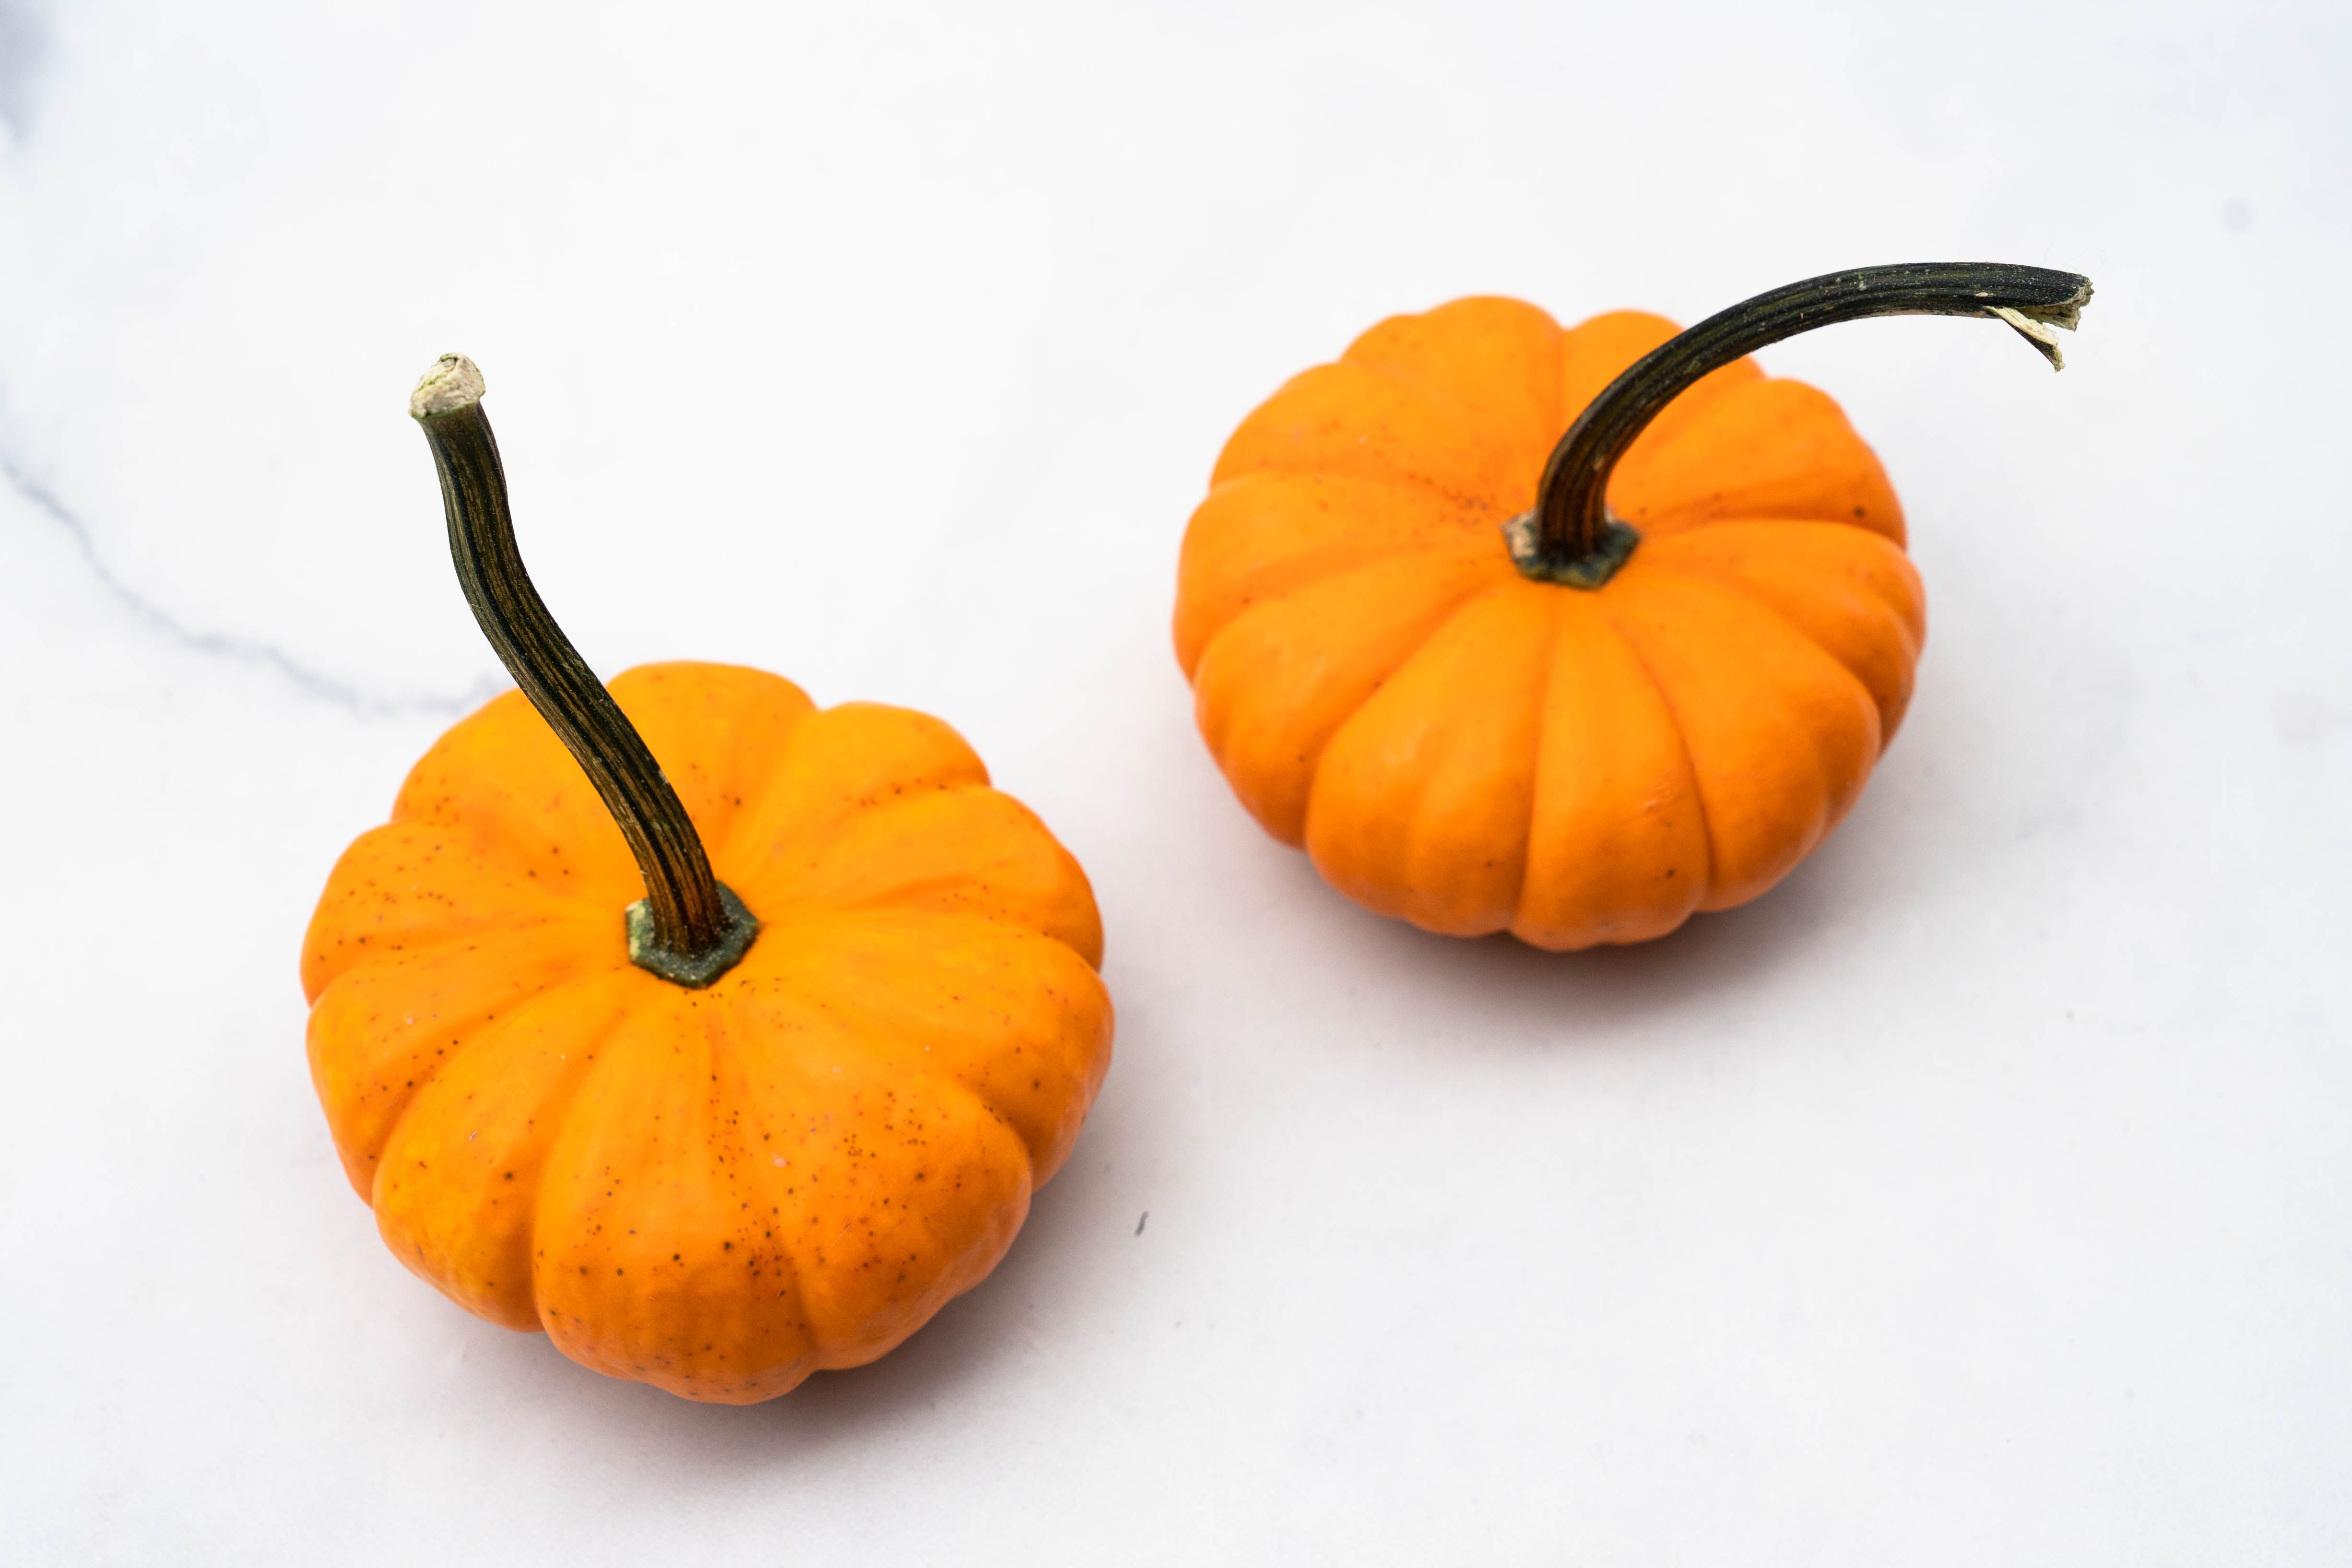 Buy Decorative Baby Pumpkins For Delivery Near You | Farm To People